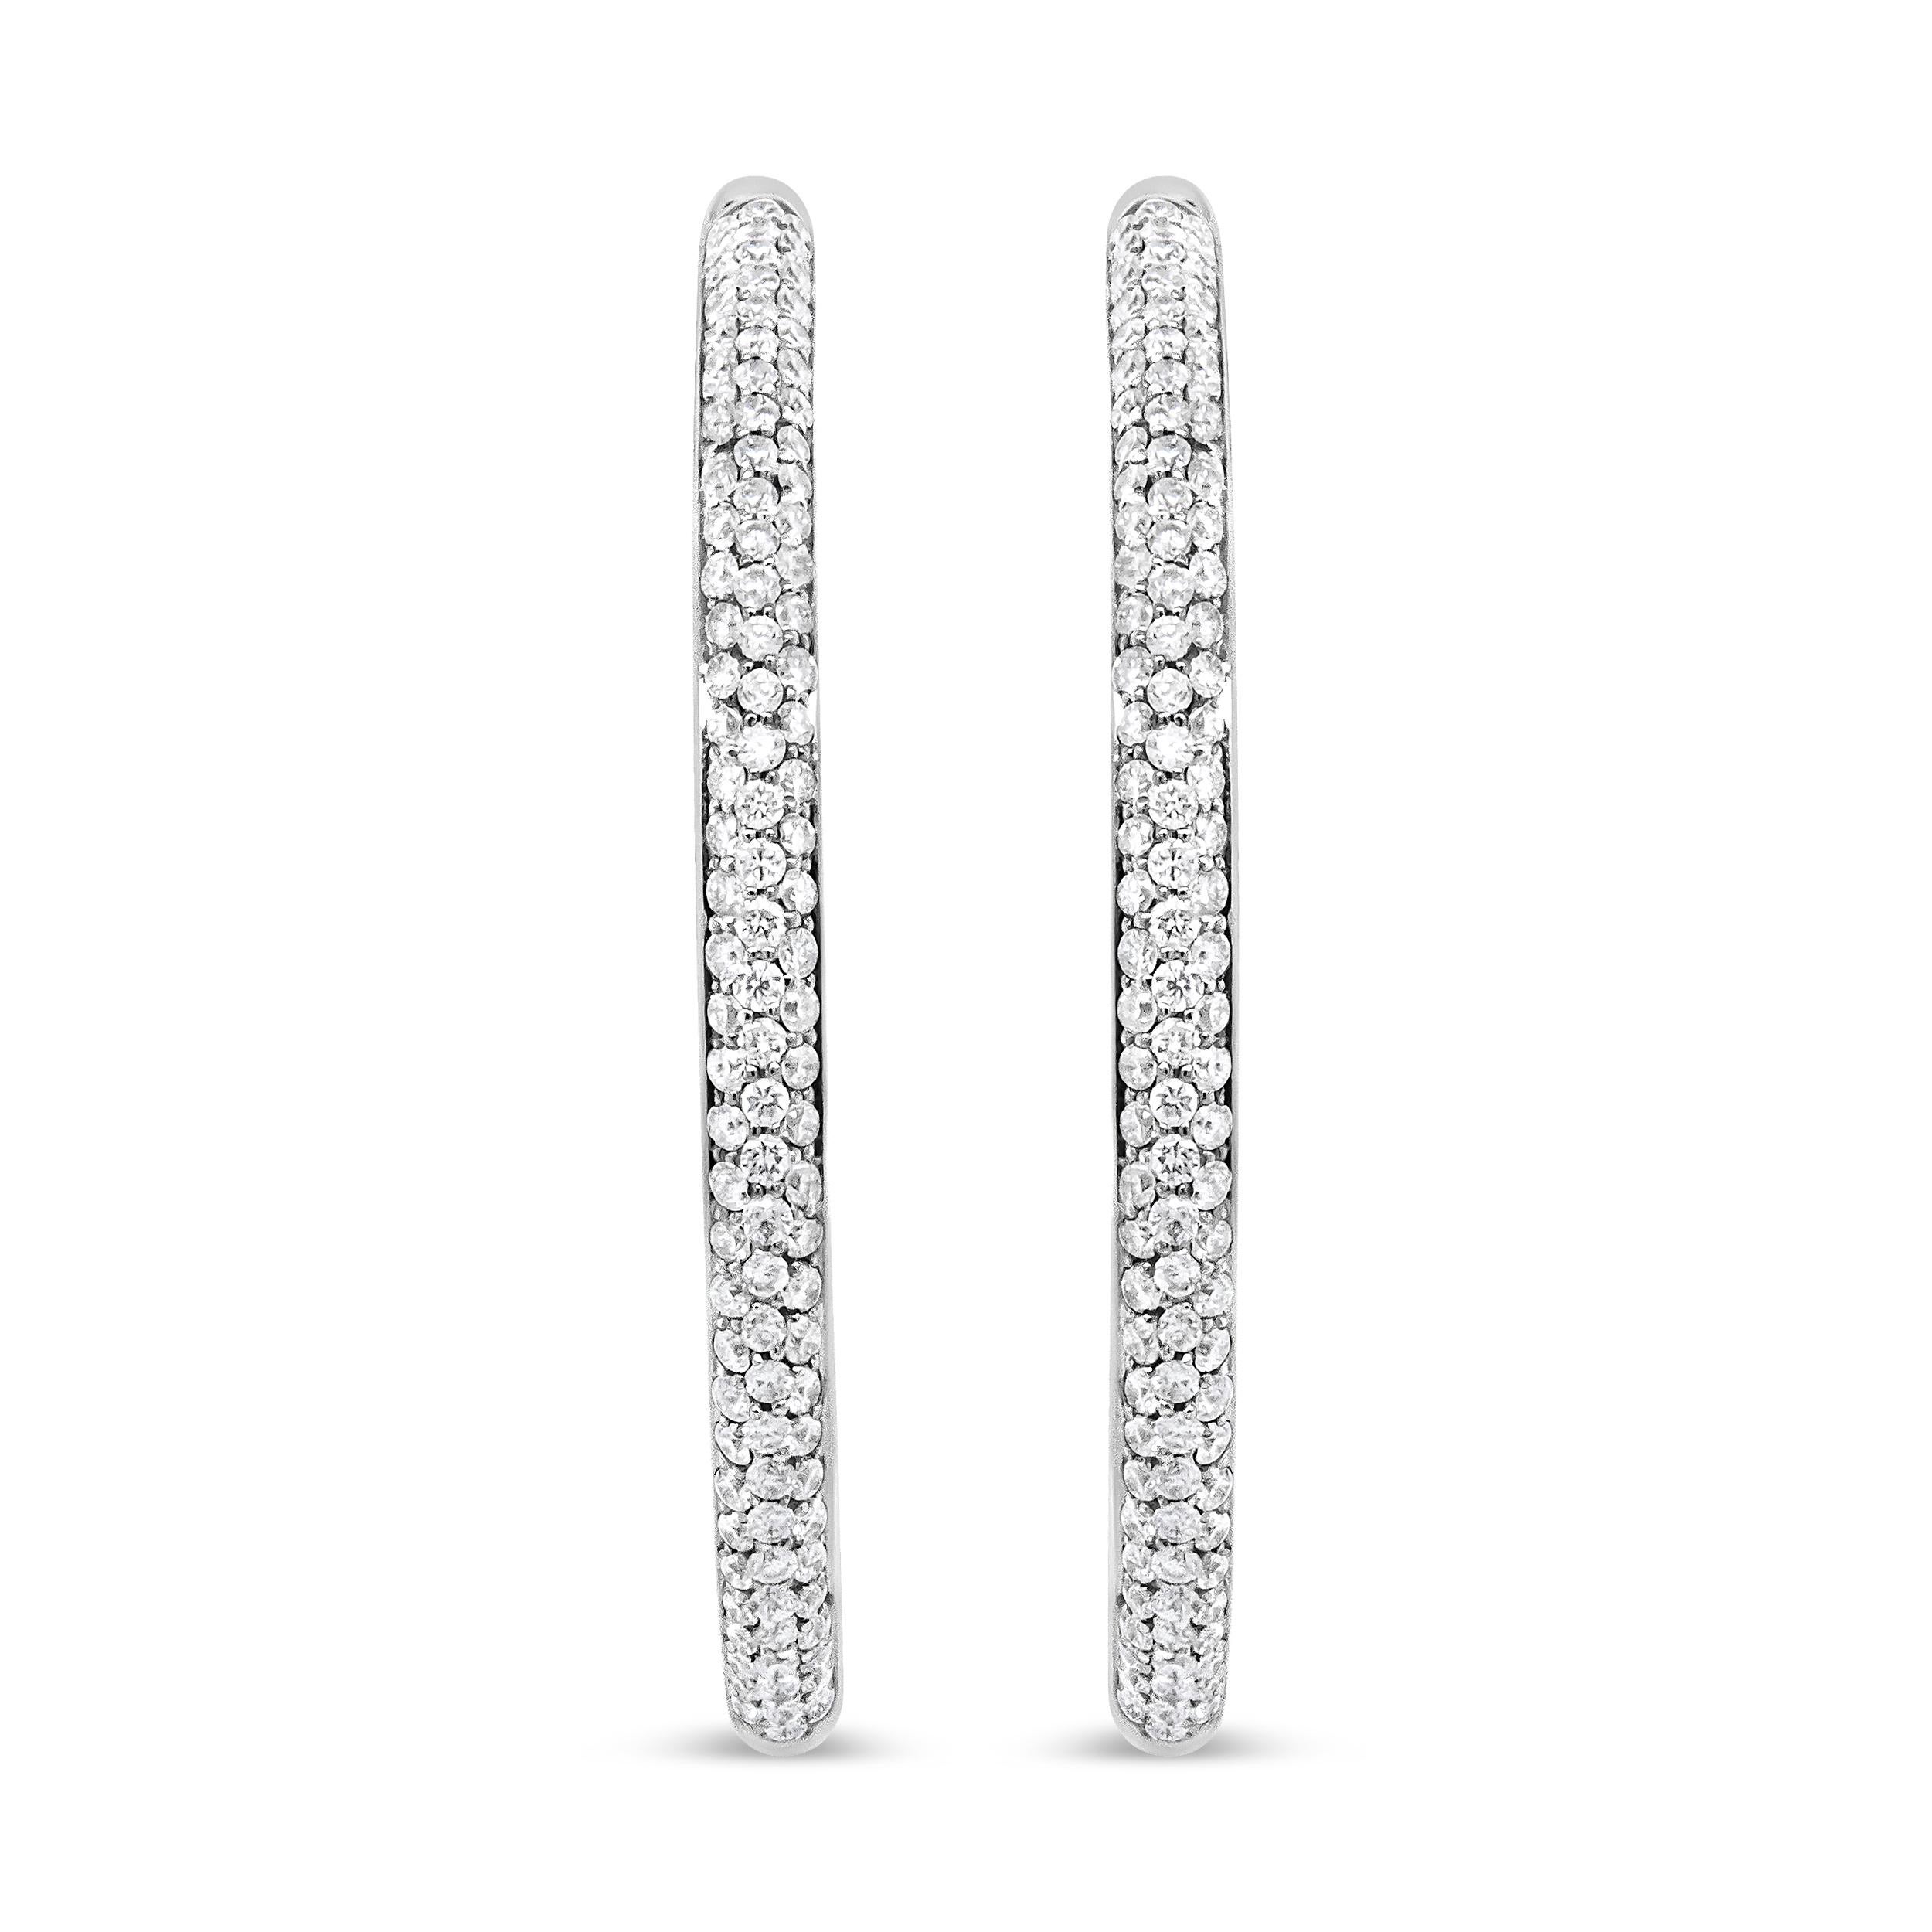 A glamorous take on a classic design, these breathtaking diamond hoops are crafted in luxurious 18k white gold that will sparkle on your earrings. The gold reflects beautifully on the stunning VS1-VS2 clarity diamonds in a round-cut design. The